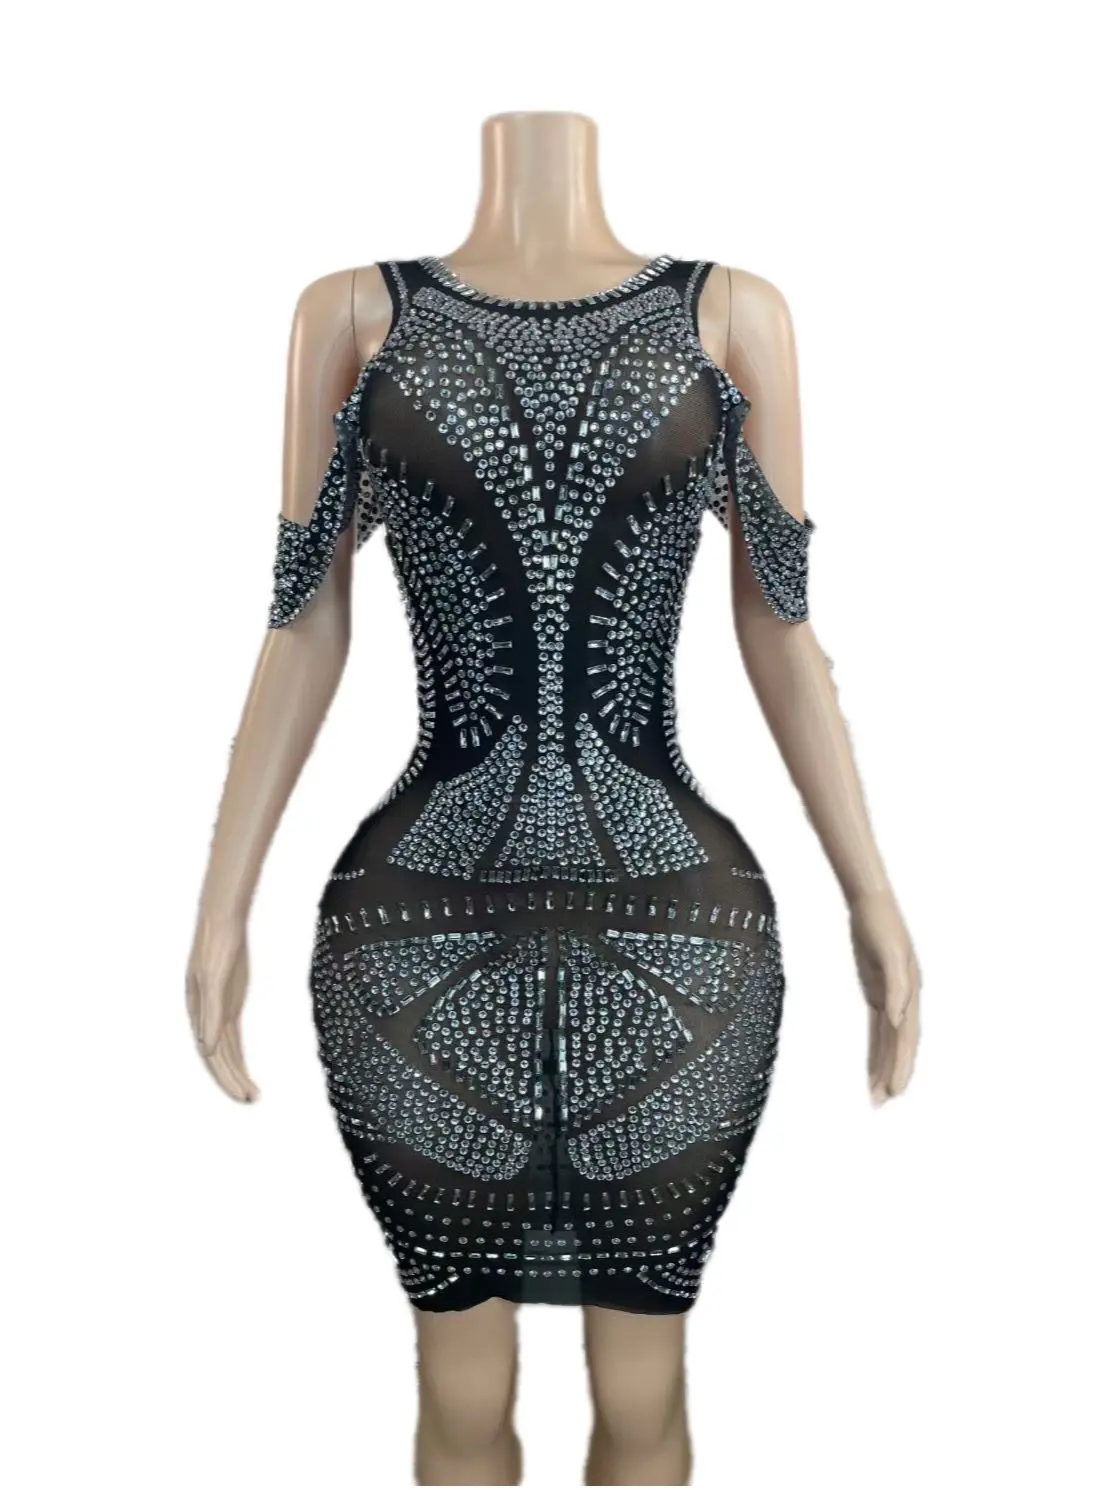 

Black Nude Shining Rhinestones Off The Shoulder Sexy Sheath Dress For Women Nightclub Party Clothing Singer Stage Costumes